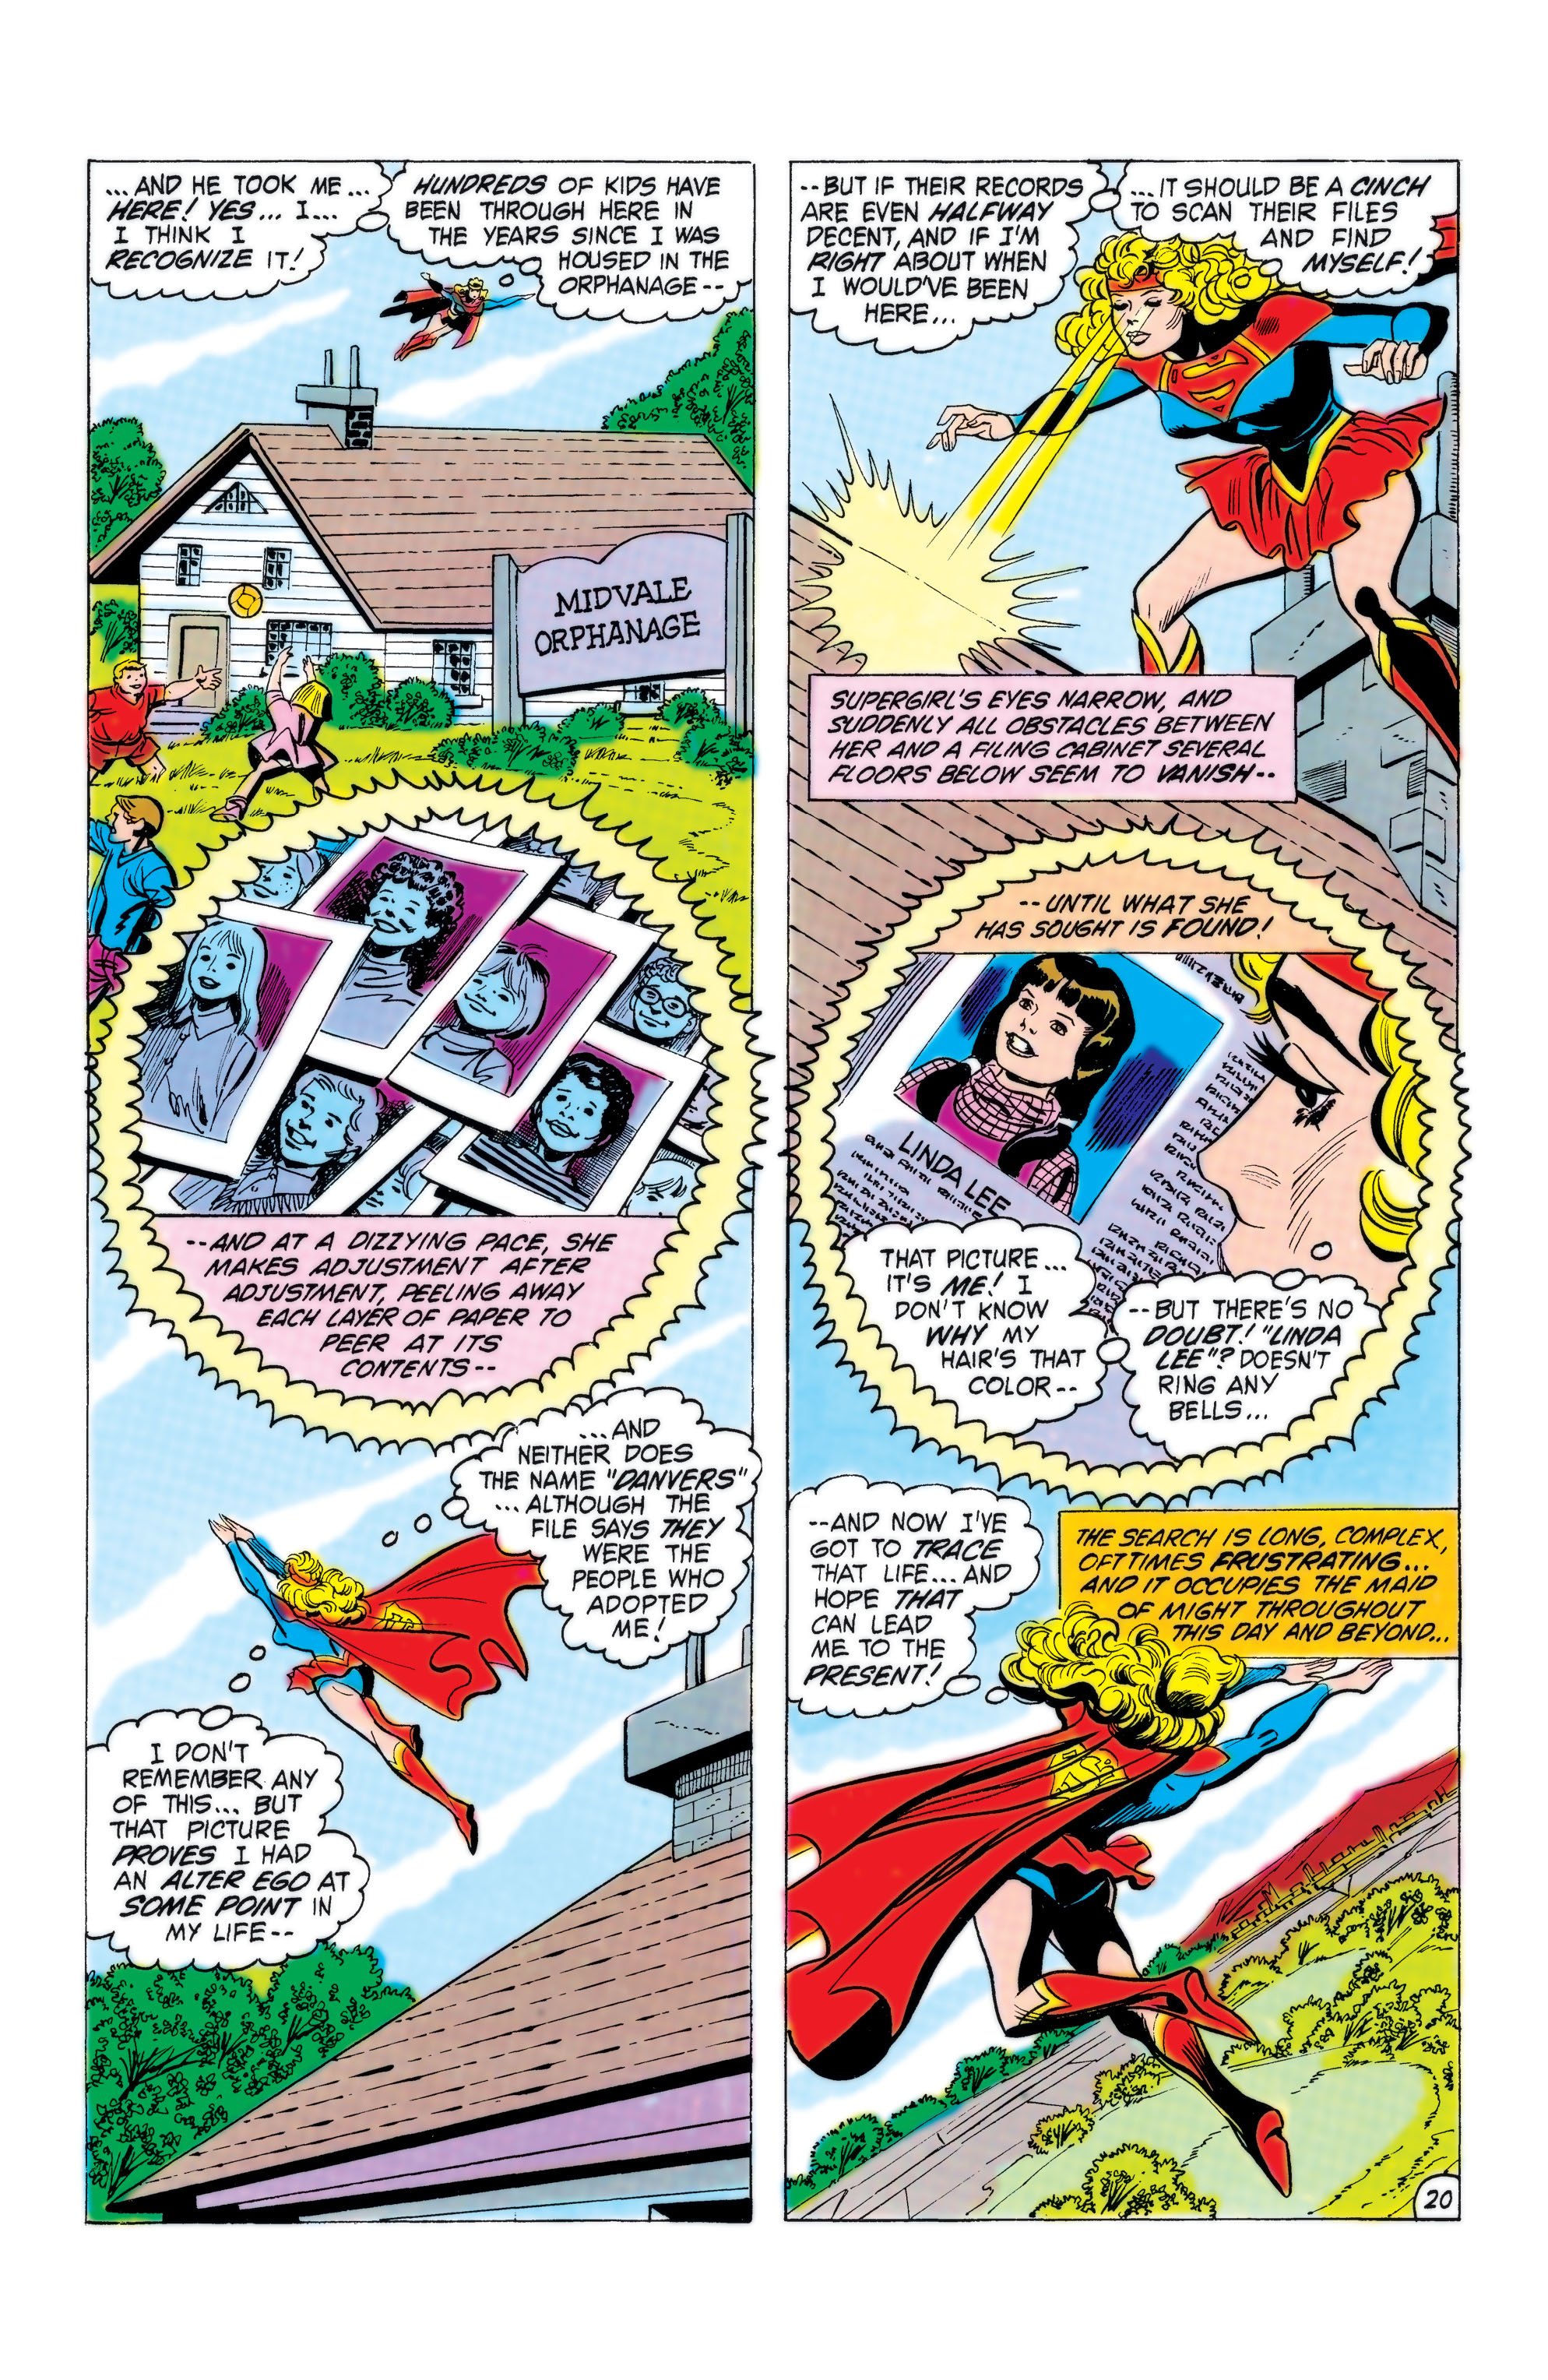 Supergirl (1982) 19 Page 20